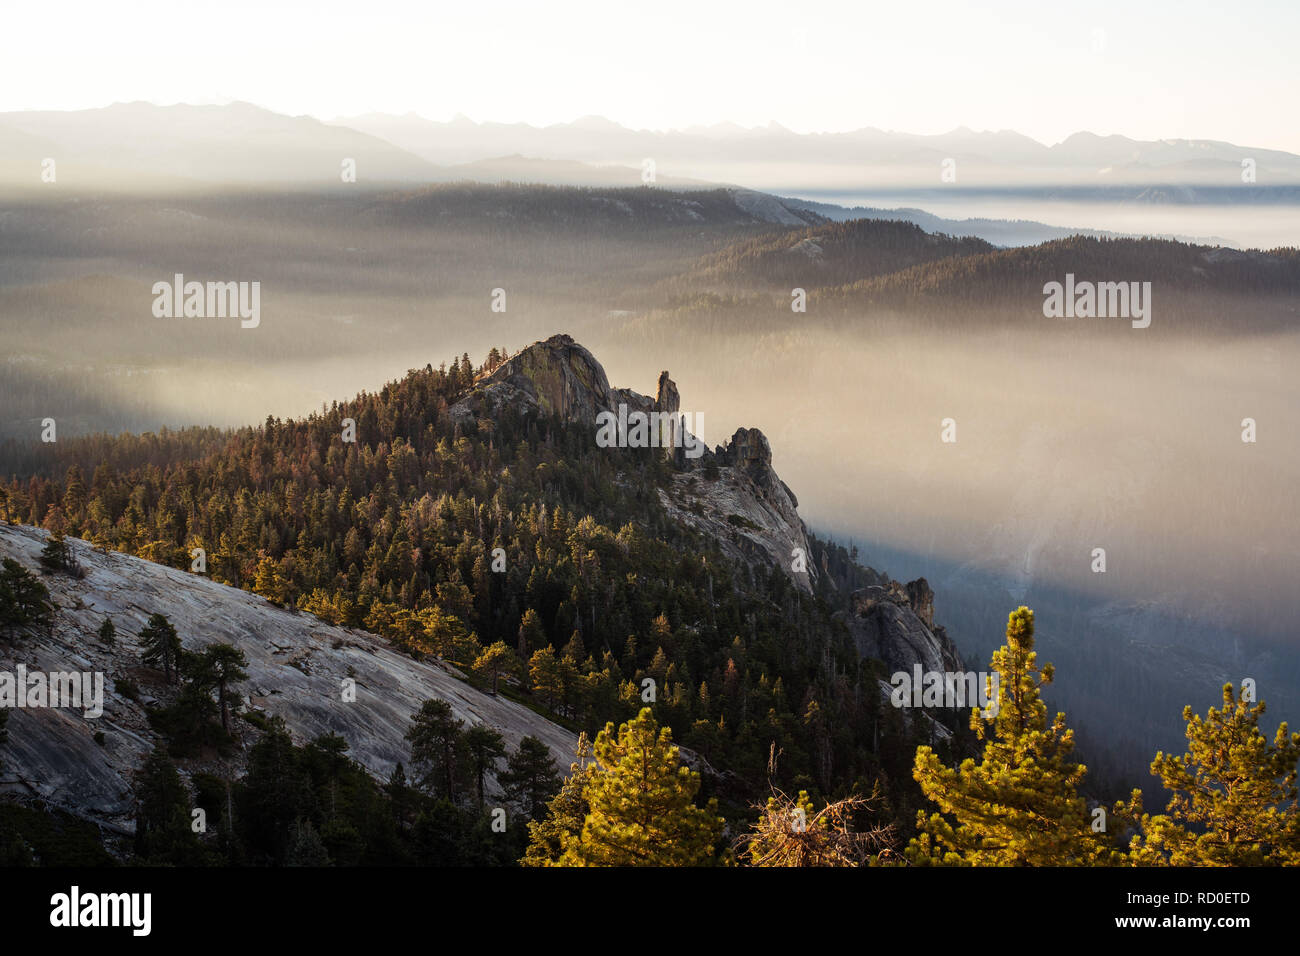 Smoke Filled Valley Behind Chimney Rock at Sunrise, Sequoia National Park, California, United States Stock Photo